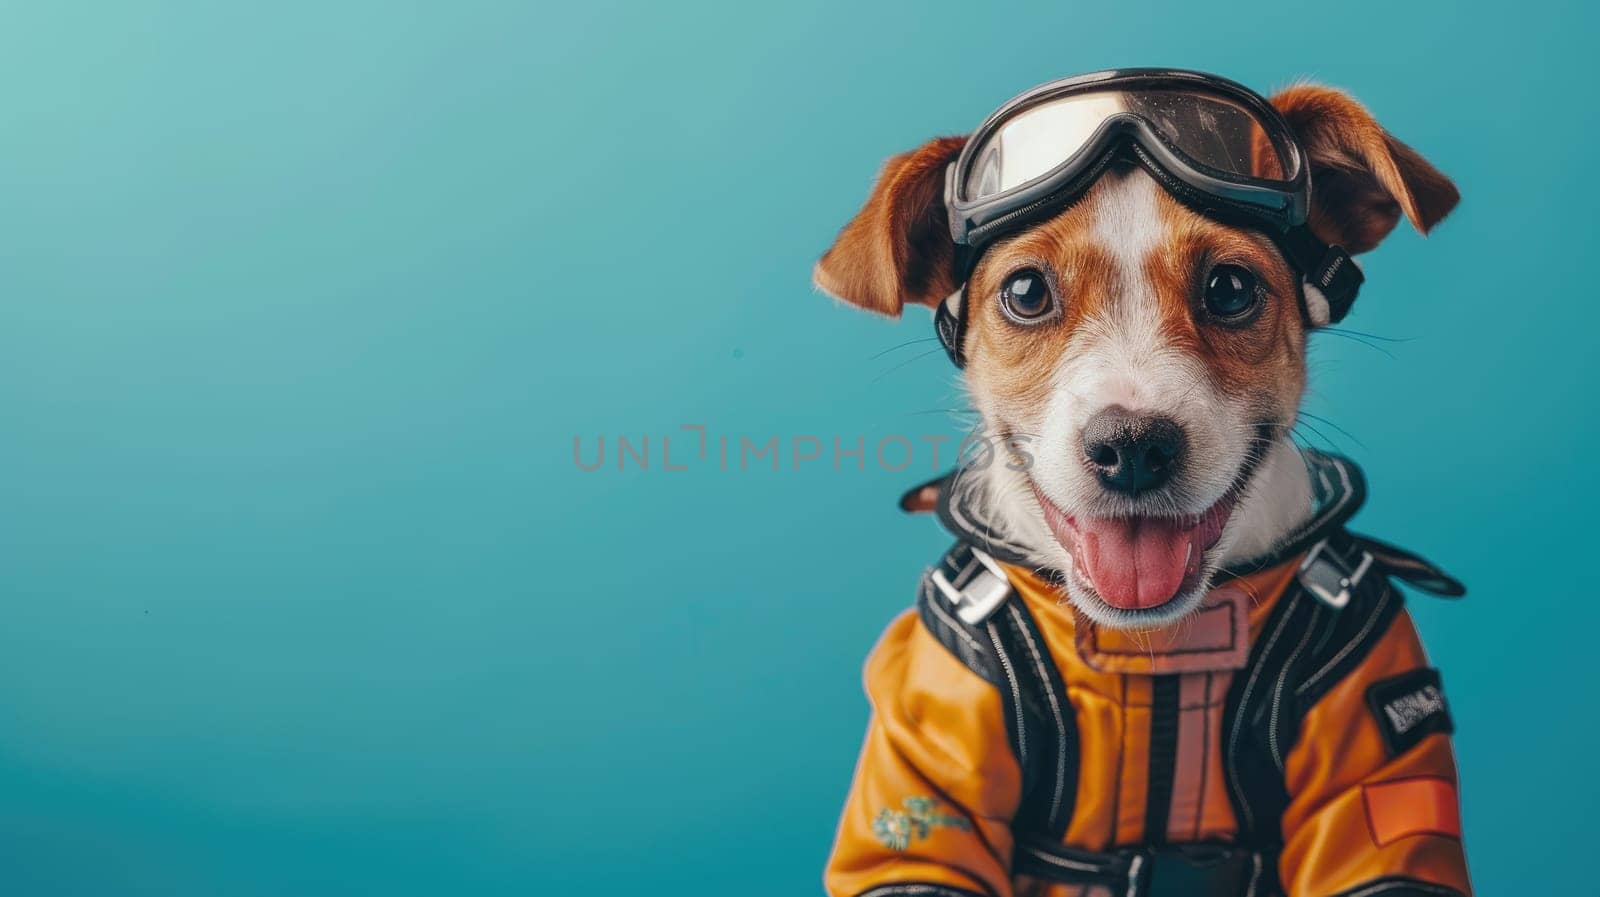 A smiling cute dog wearing a motor racer suit and sitting on the blue color background by nijieimu